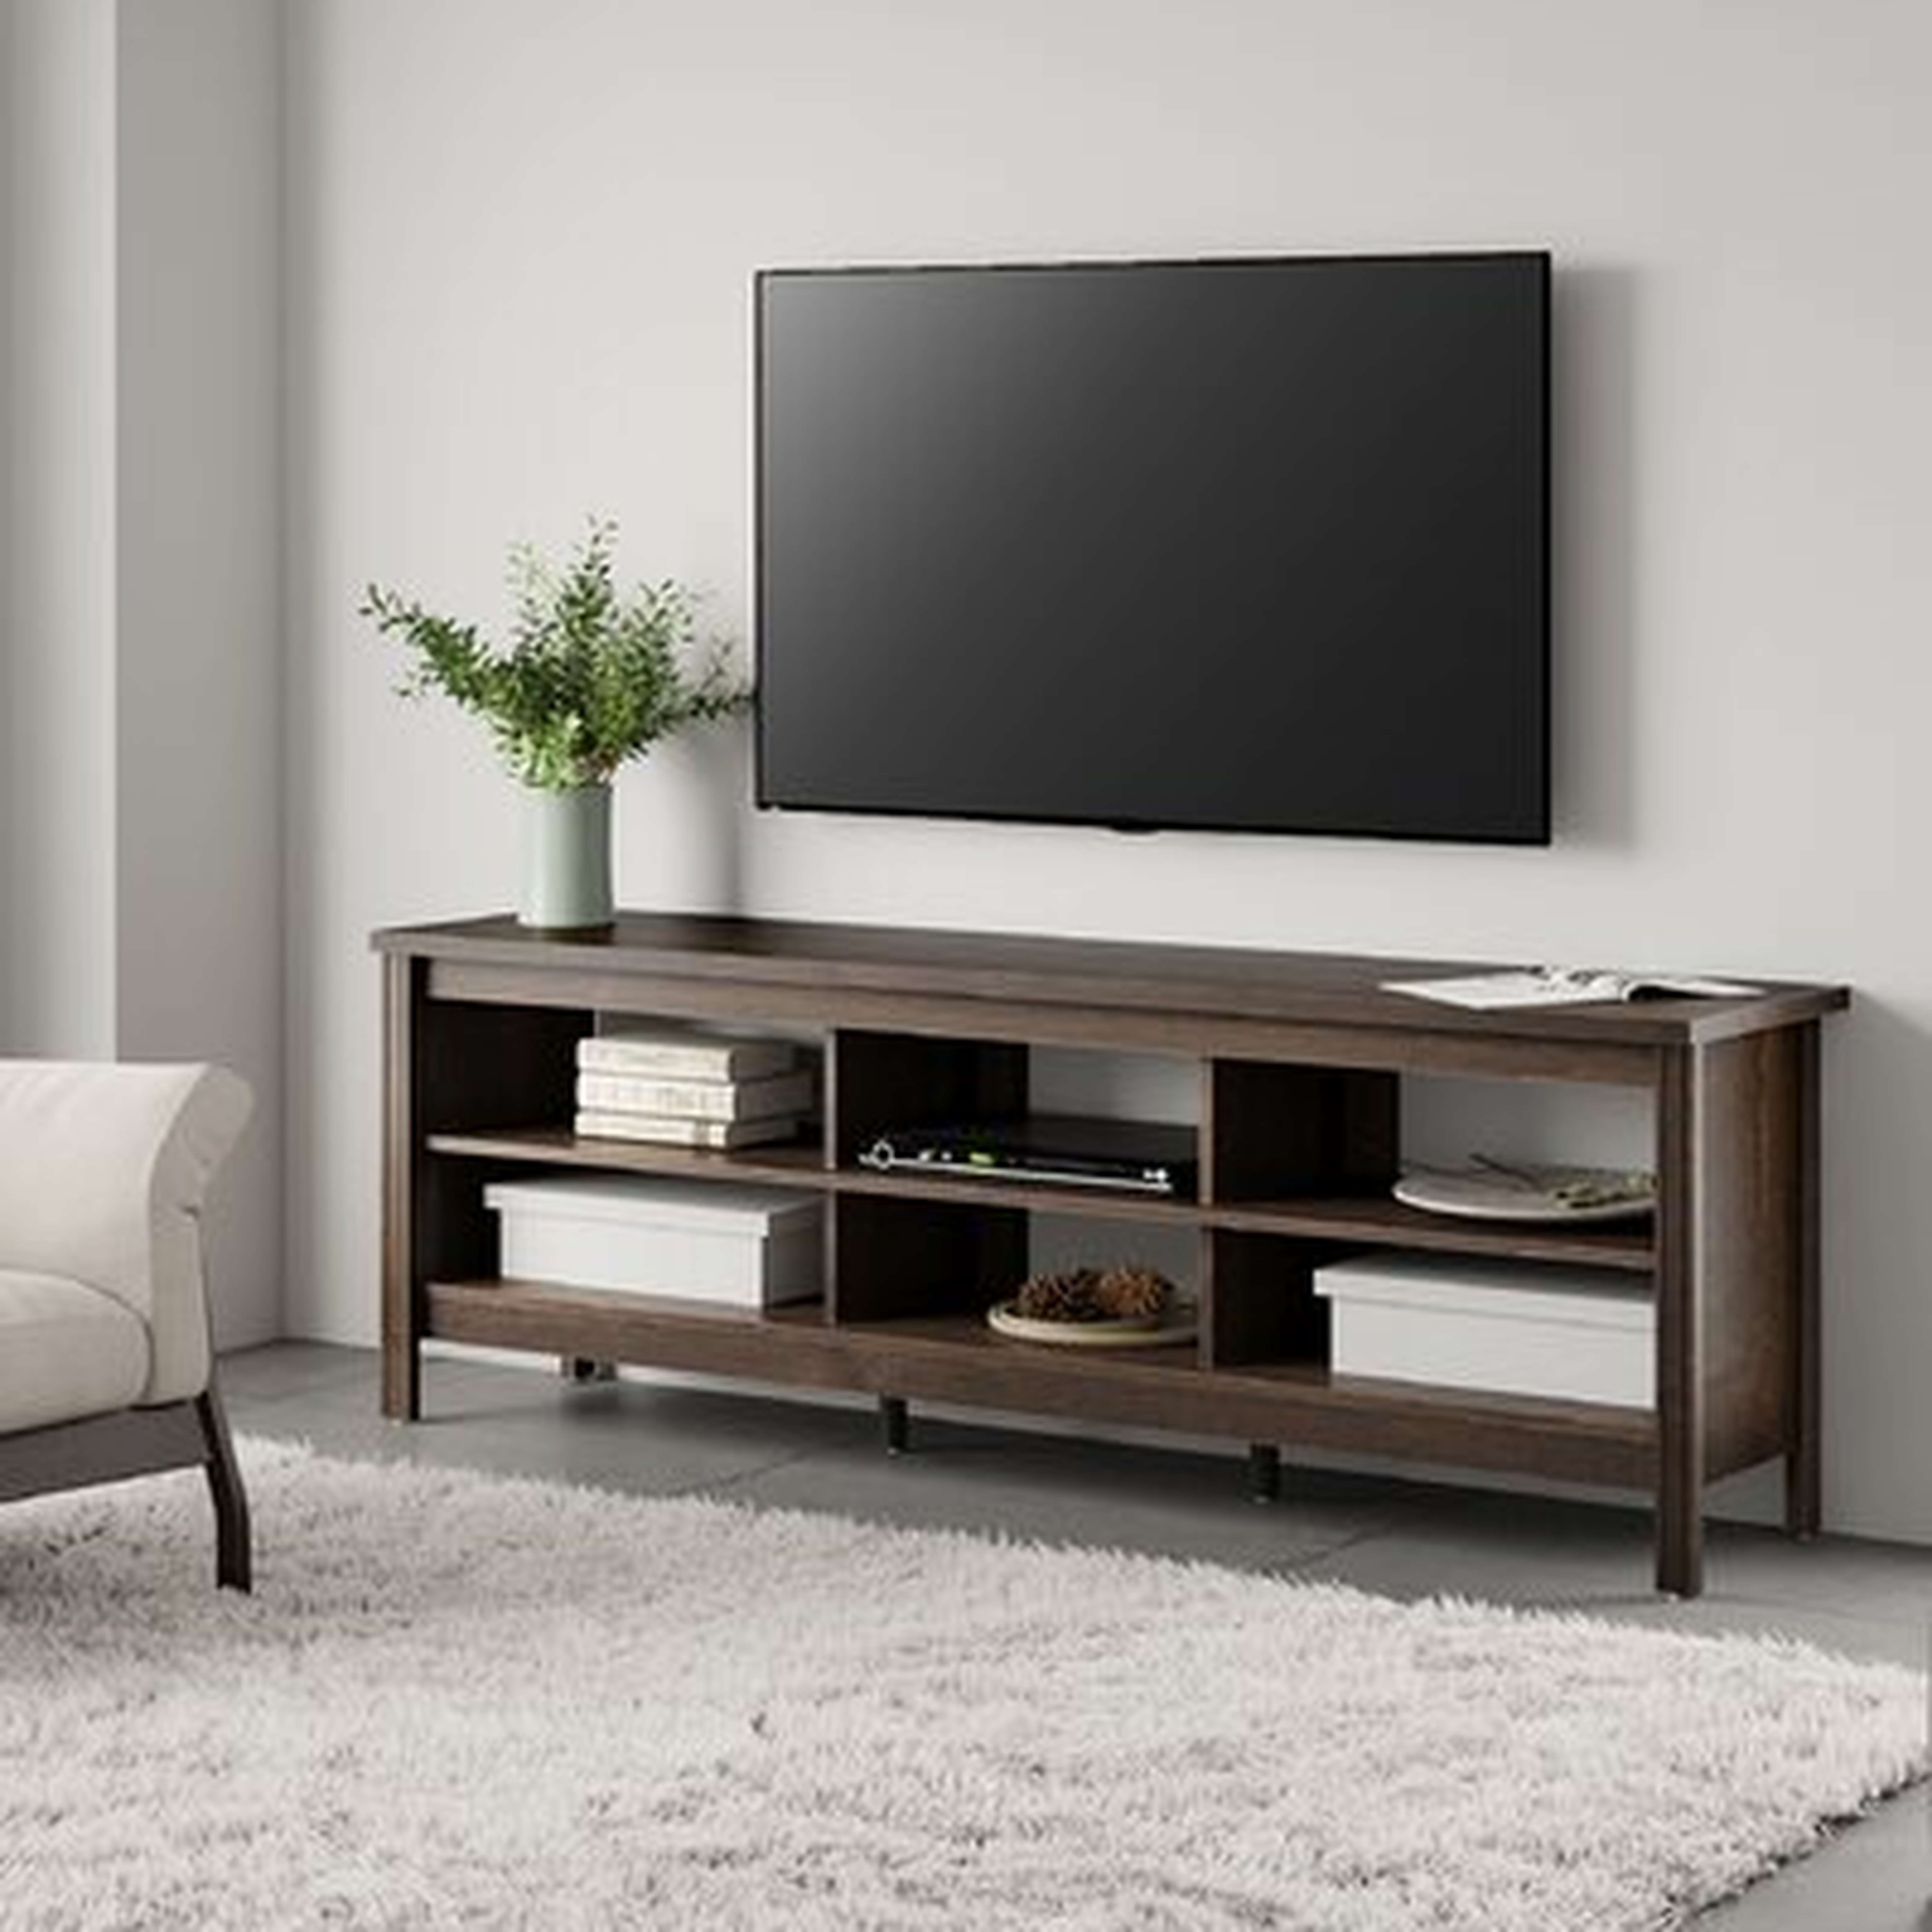 TV Stands For 80 Inch TV Enetertainment Center Wood Media Console Cabinet For Bedroom And Living Room,70 Inch,Black - Wayfair